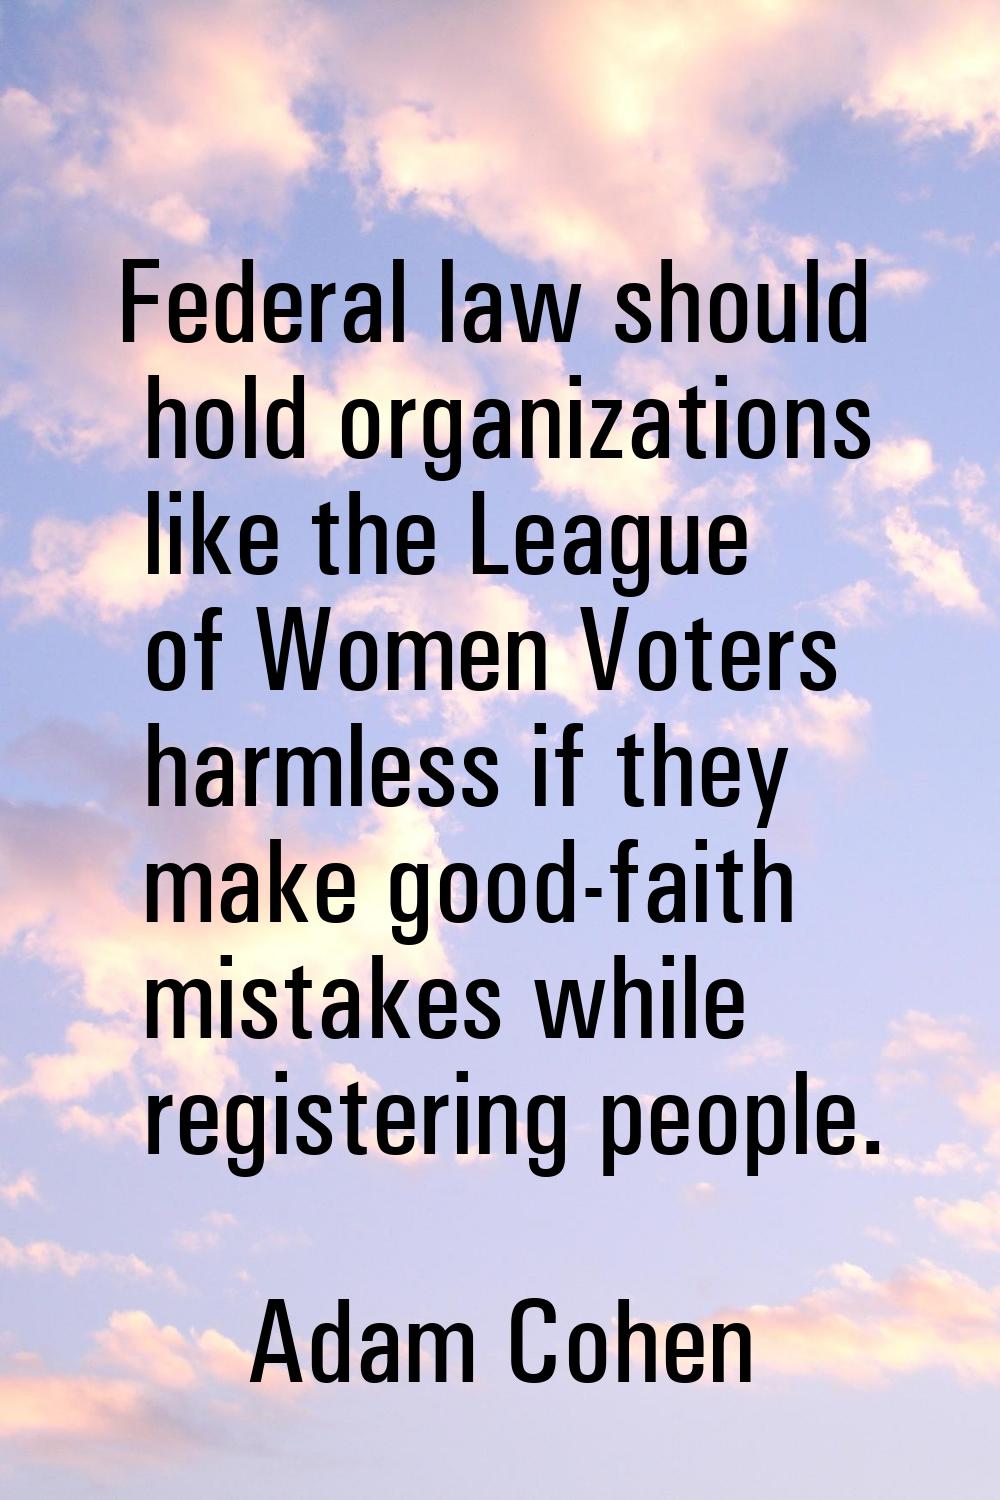 Federal law should hold organizations like the League of Women Voters harmless if they make good-fa